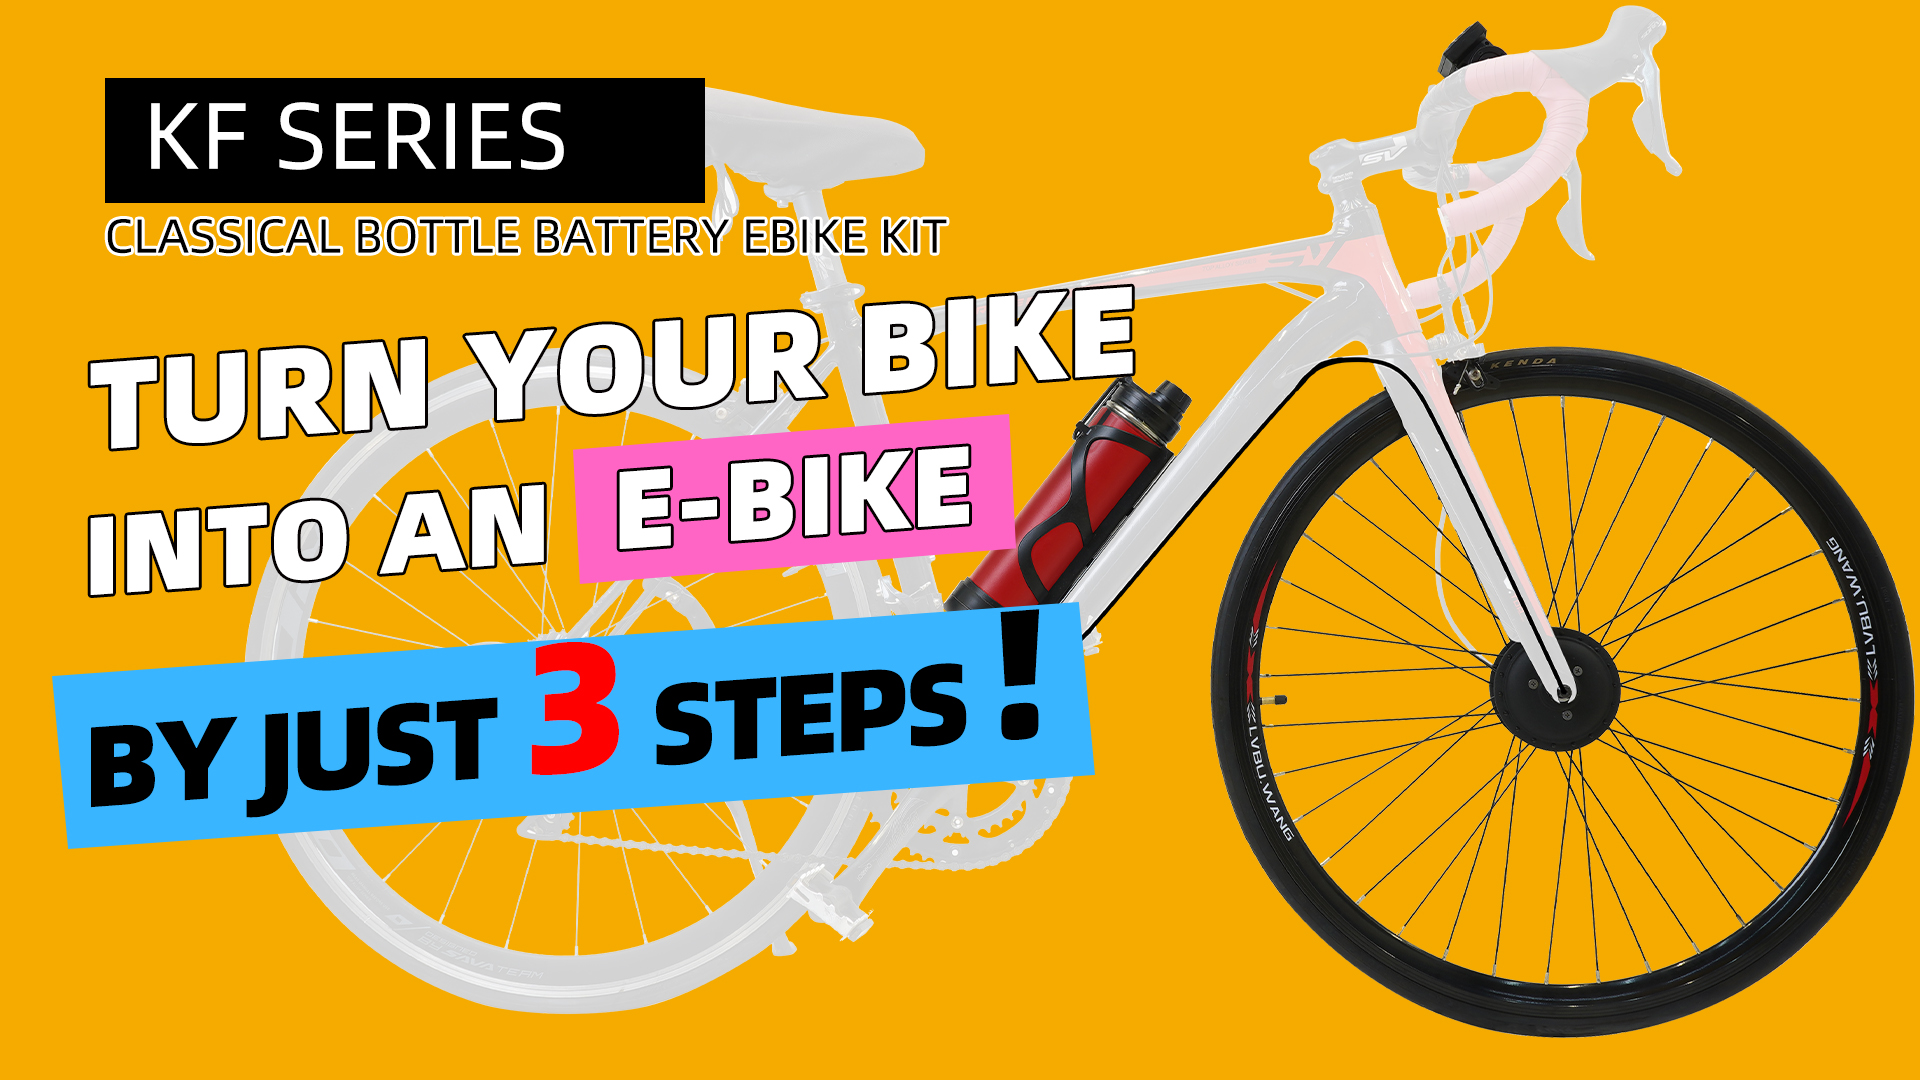 Bottle Battery Ebike Kit ‖ KF-D Installation video ‖ Turn Your Bike into an Ebike by Just 3 Steps!